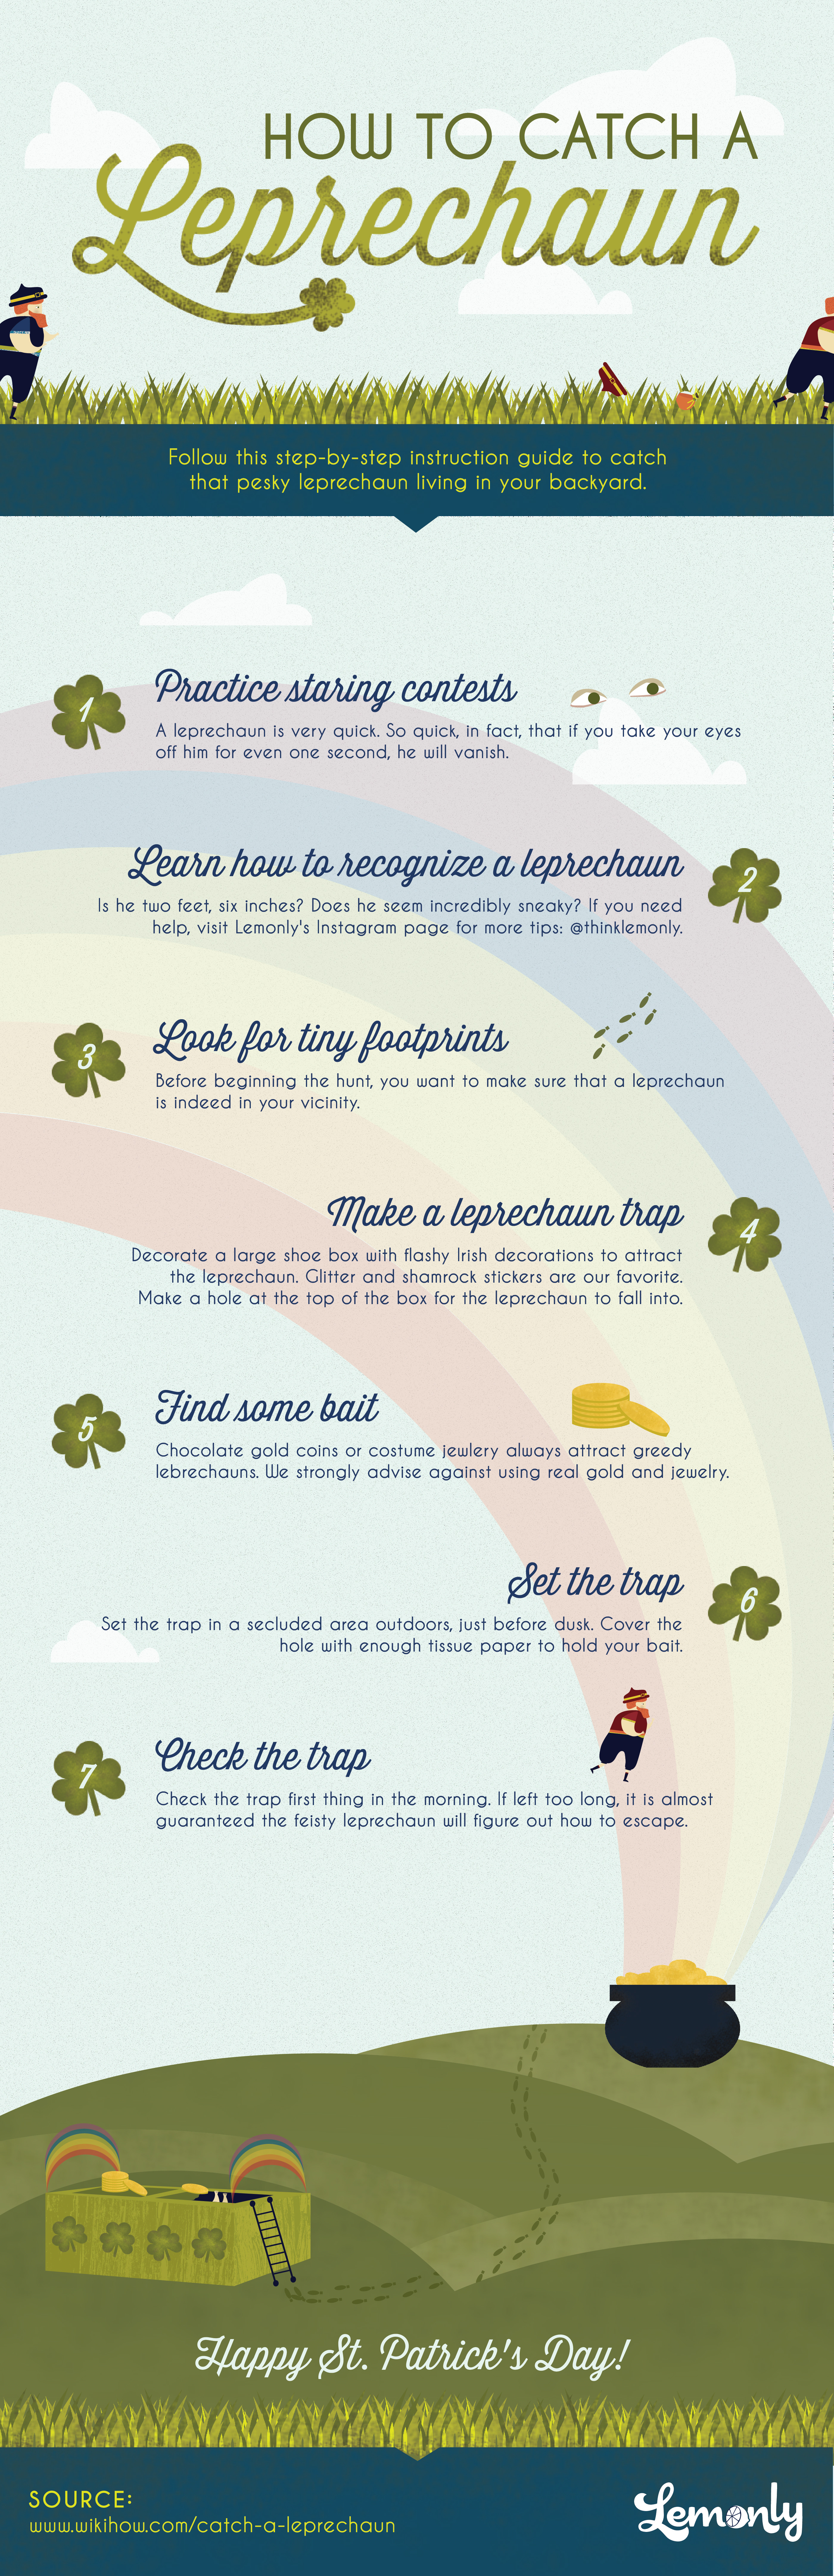 How to Catch a Leprechaun Infographic - Lemonly